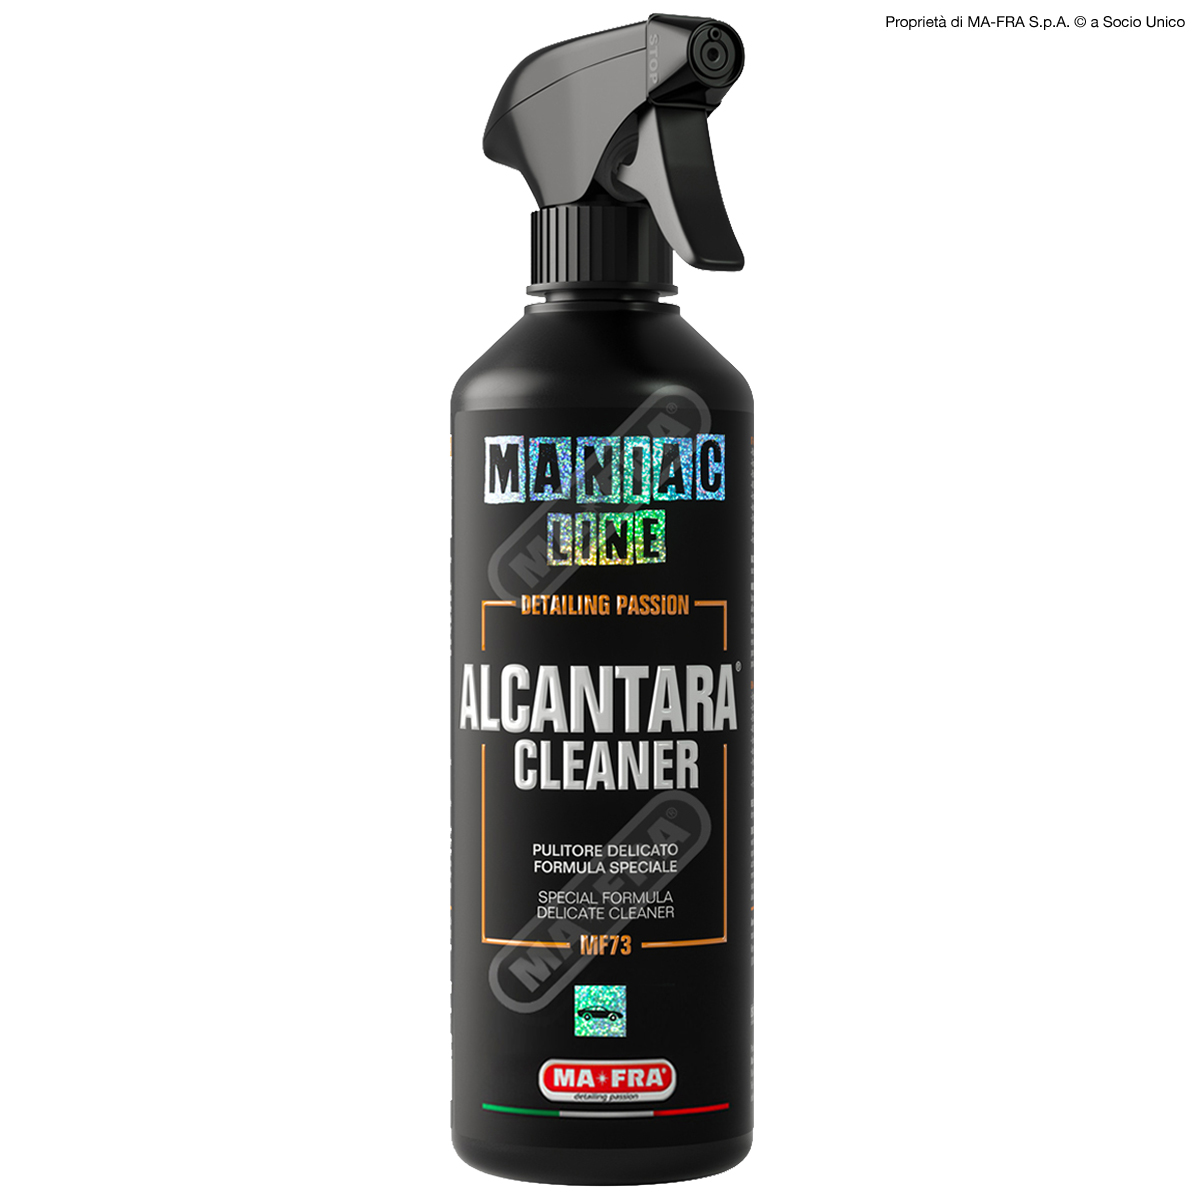 replacement 500ml Maniac Line specific cleaner for Alcantara